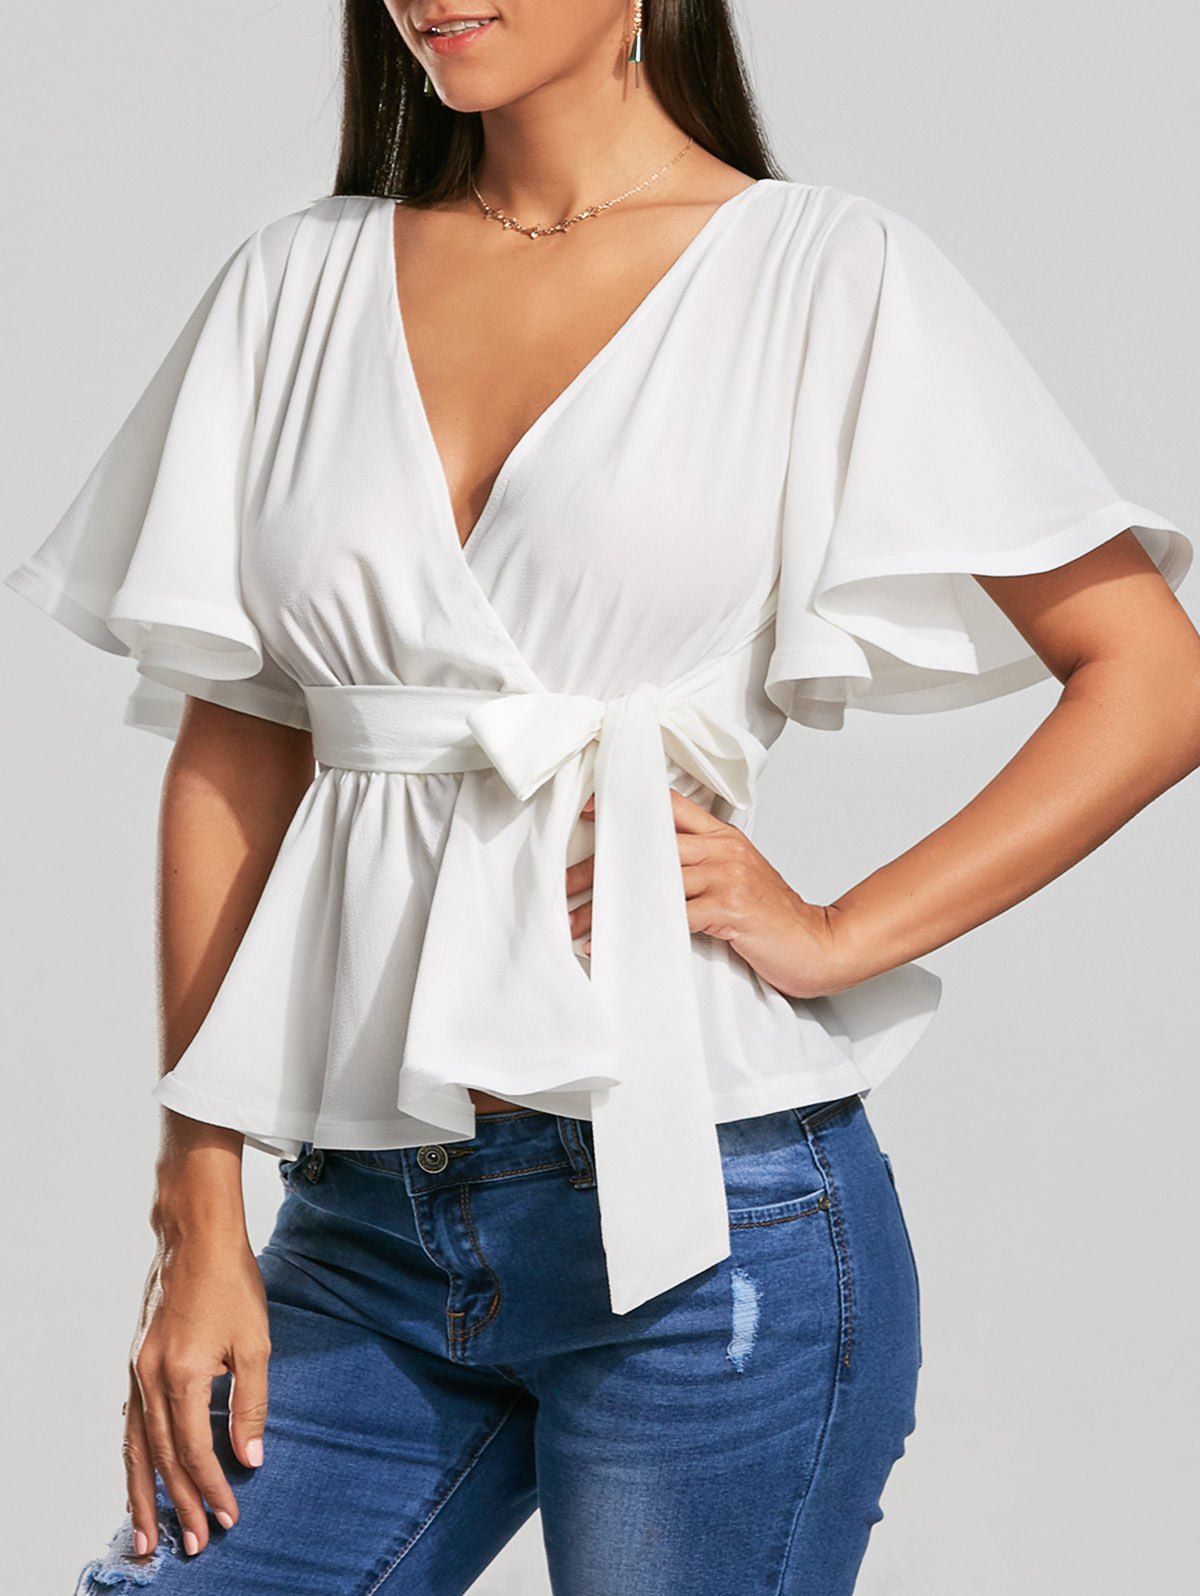 [64% OFF] Plunging Neckline Bowknot Belted Peplum Surplice Blouse | Rosegal